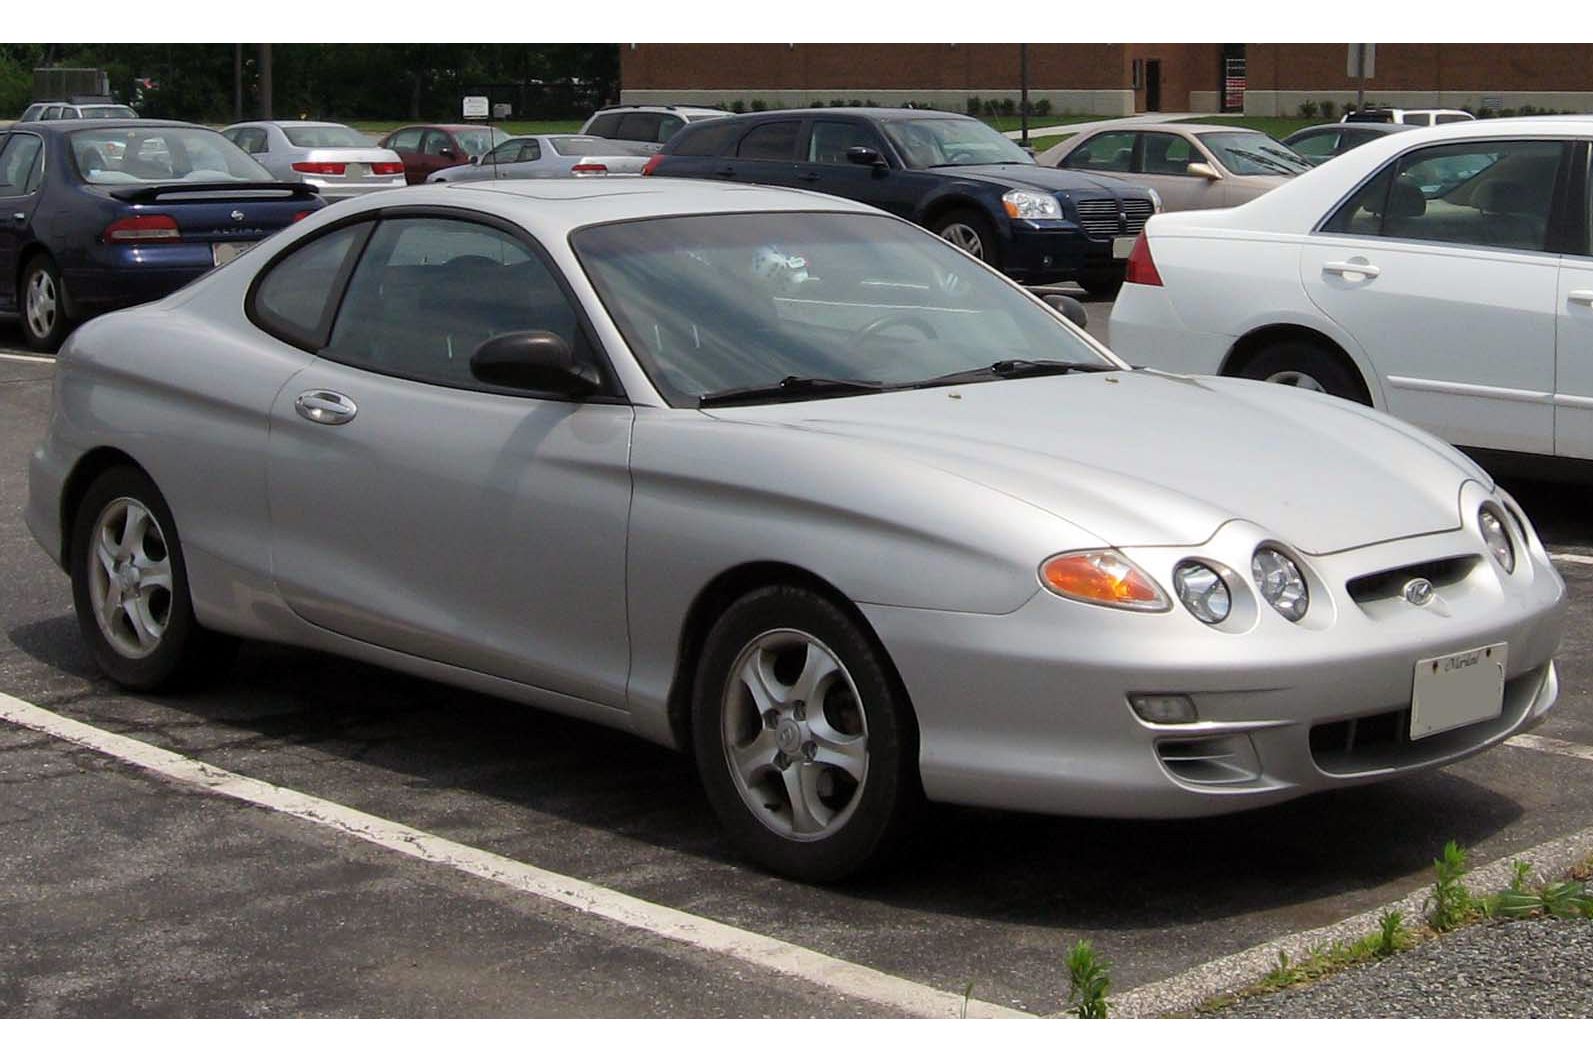 <p>Back when Hyundai was still trying to hold its own in the U.S. market, it decided to take a risk with the sporty coupe's redesign. For many observers, it was a swing and a miss, making the car look worse and landing it on Jalopnik's list of "The Ten Worst Automotive Facelifts of All Time." The new Tiburon was an "<a href="https://jalopnik.com/5982442/the-ten-worst-automotive-facelifts-of-all-time">insect-eyed monstrosity</a> ... It looks like it came out of the black lagoon," the auto news site laments. Still, Hyundai got the last laugh, with <a href="http://carsalesbase.com/us-car-sales-data/hyundai/hyundai-tiburon/">sales that jumped markedly</a> in 2000. </p>